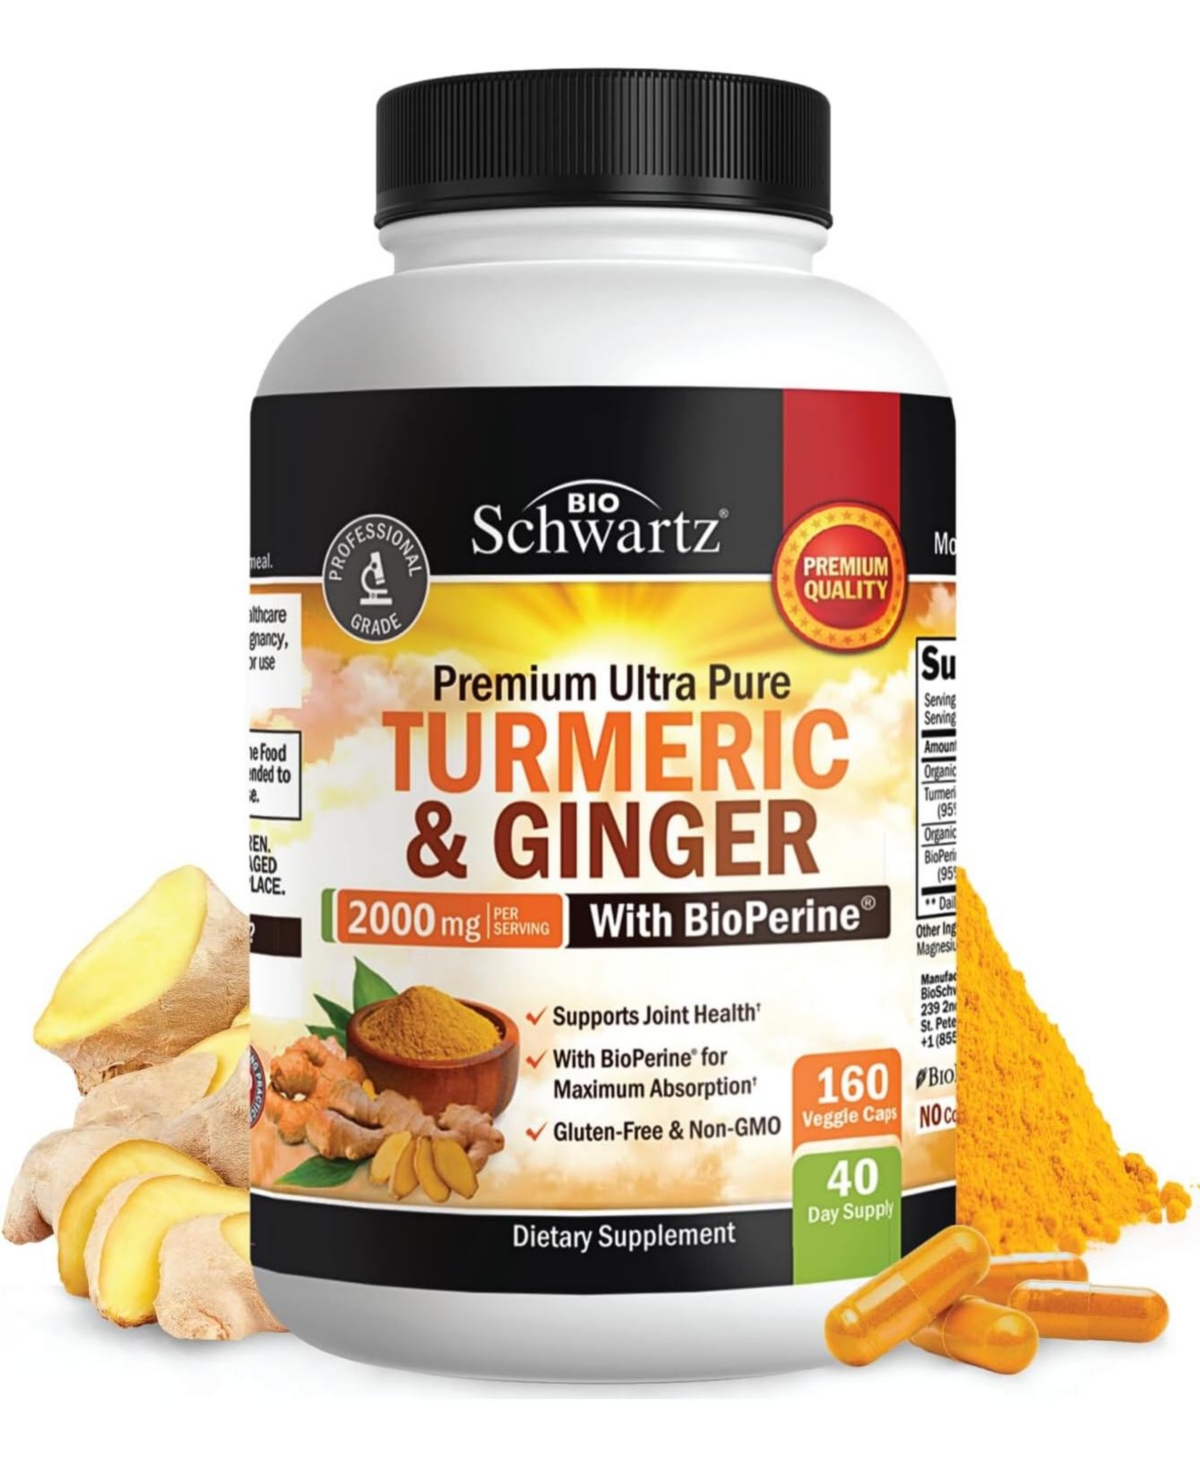 Turmeric & Ginger Supplement 2000mg, 160 ct